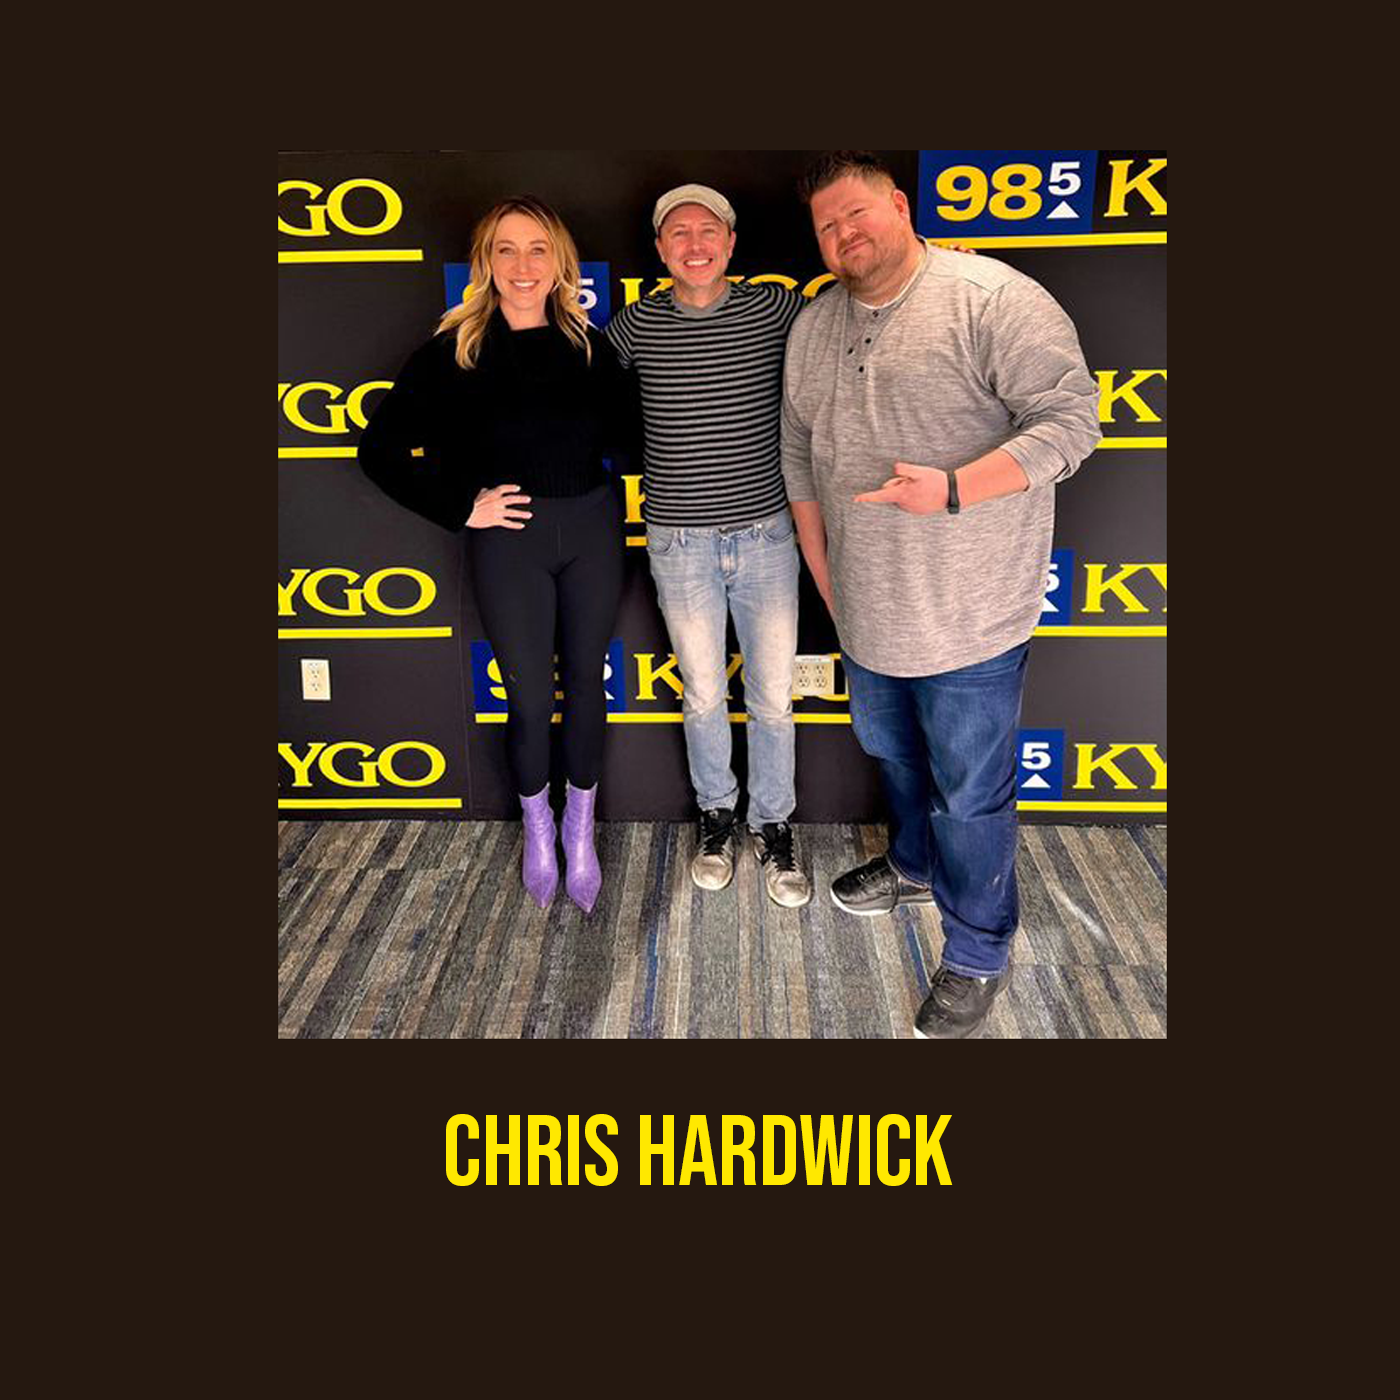 Chris Hardwick stopped by to talk about his shows at Comedy Works this weekend, going to school in Colorado and being a Bowler Brat traveling around the country 